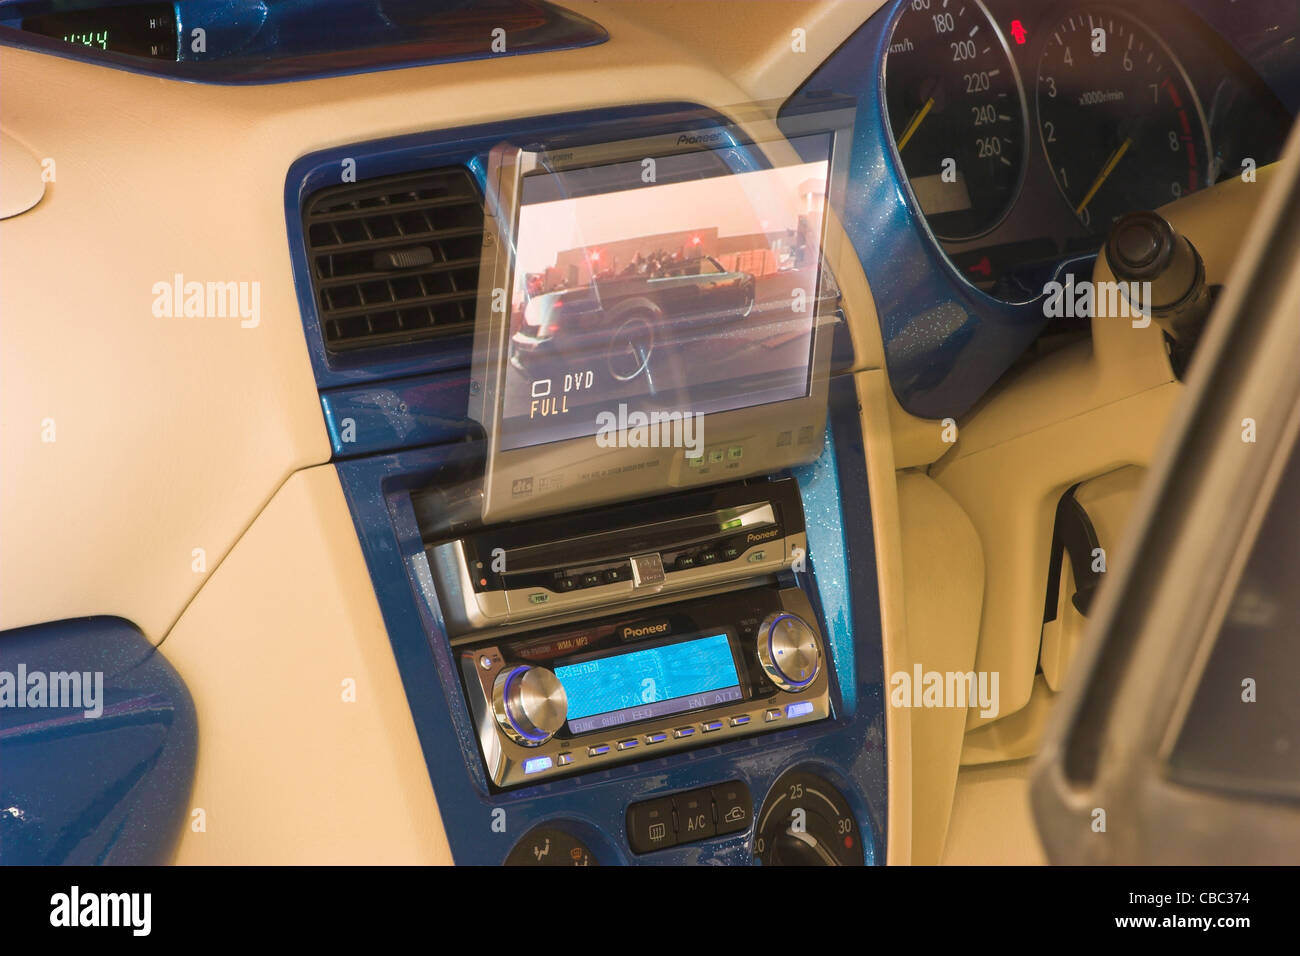 Time exposure to show movement of a dedicated in-vehicle television screen moving into position. Stock Photo